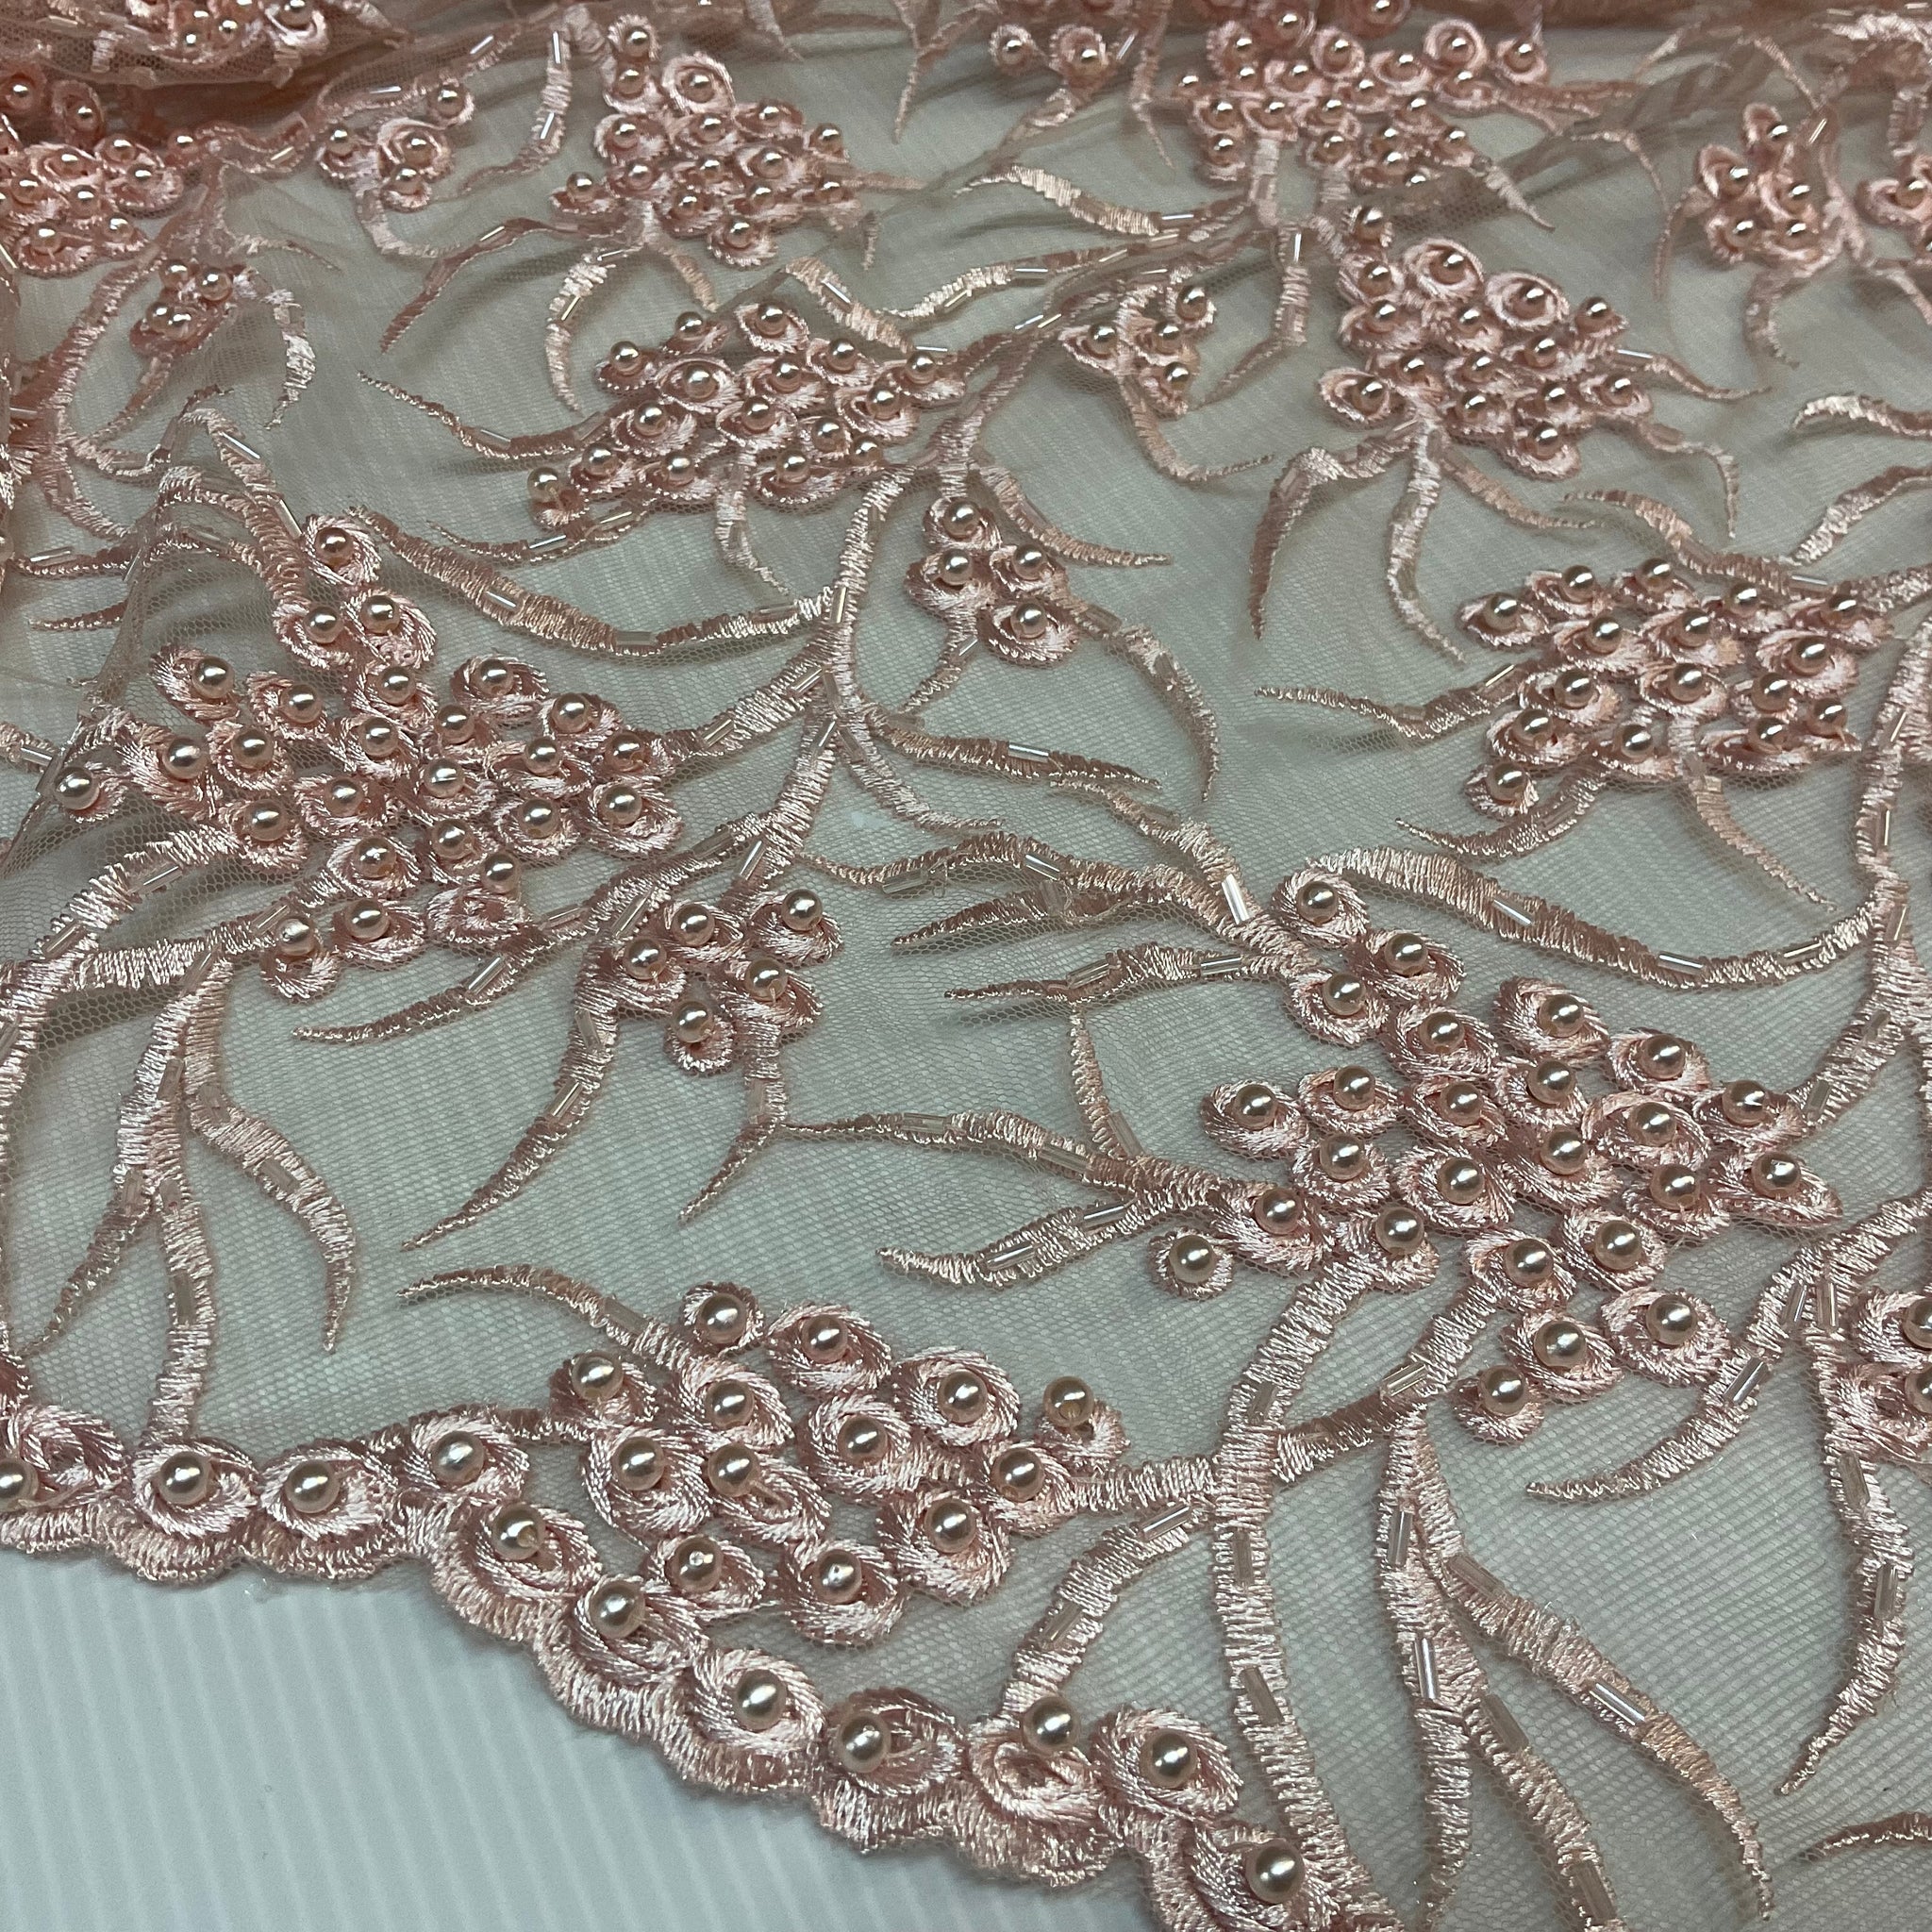 Pale Pink embroidery lace with pale pink faux pearls and pale pink bungle beads - Double scalloped border Fabric - M1400-36